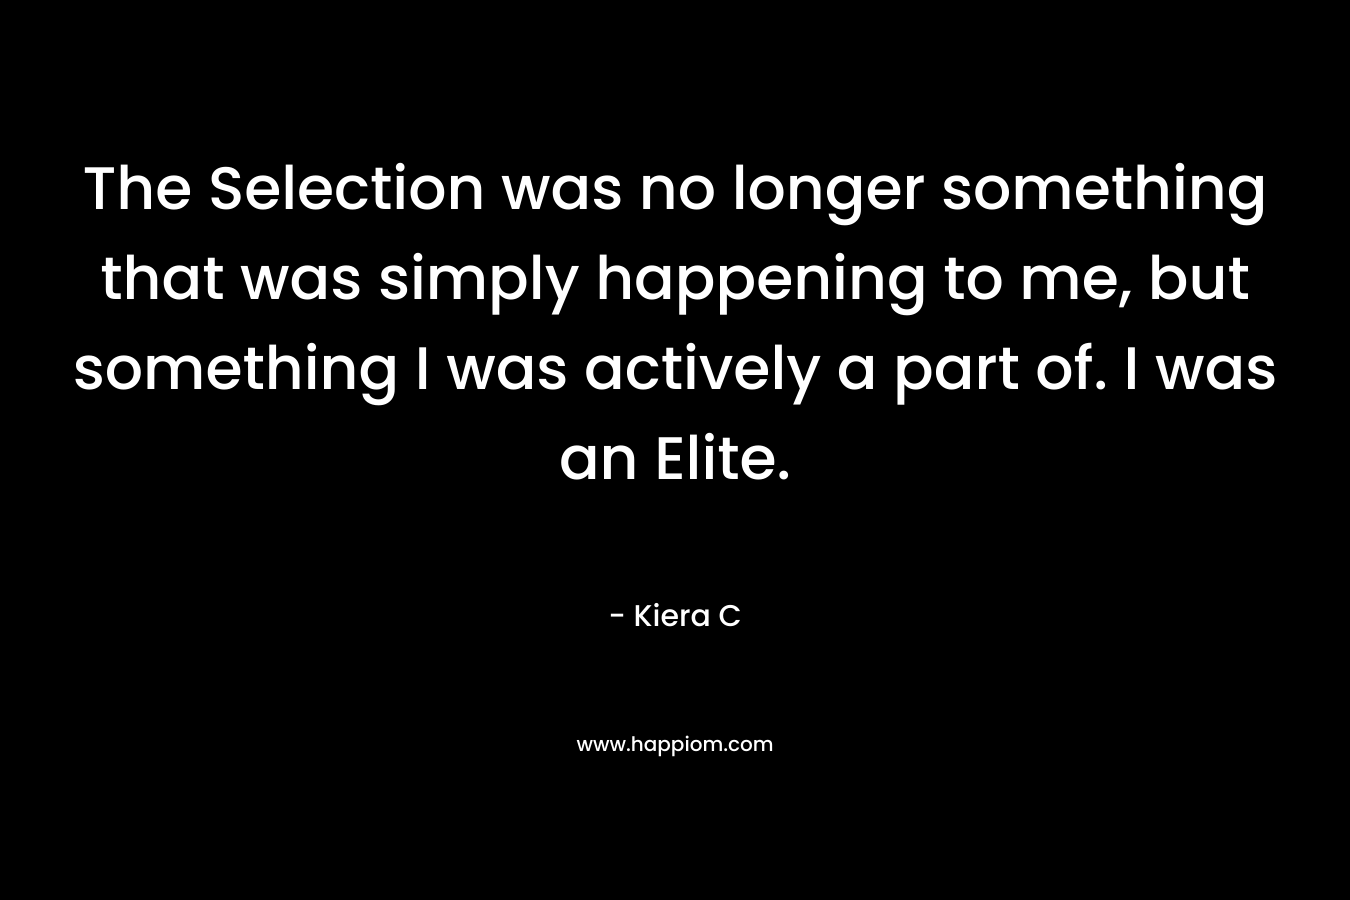 The Selection was no longer something that was simply happening to me, but something I was actively a part of. I was an Elite. – Kiera C